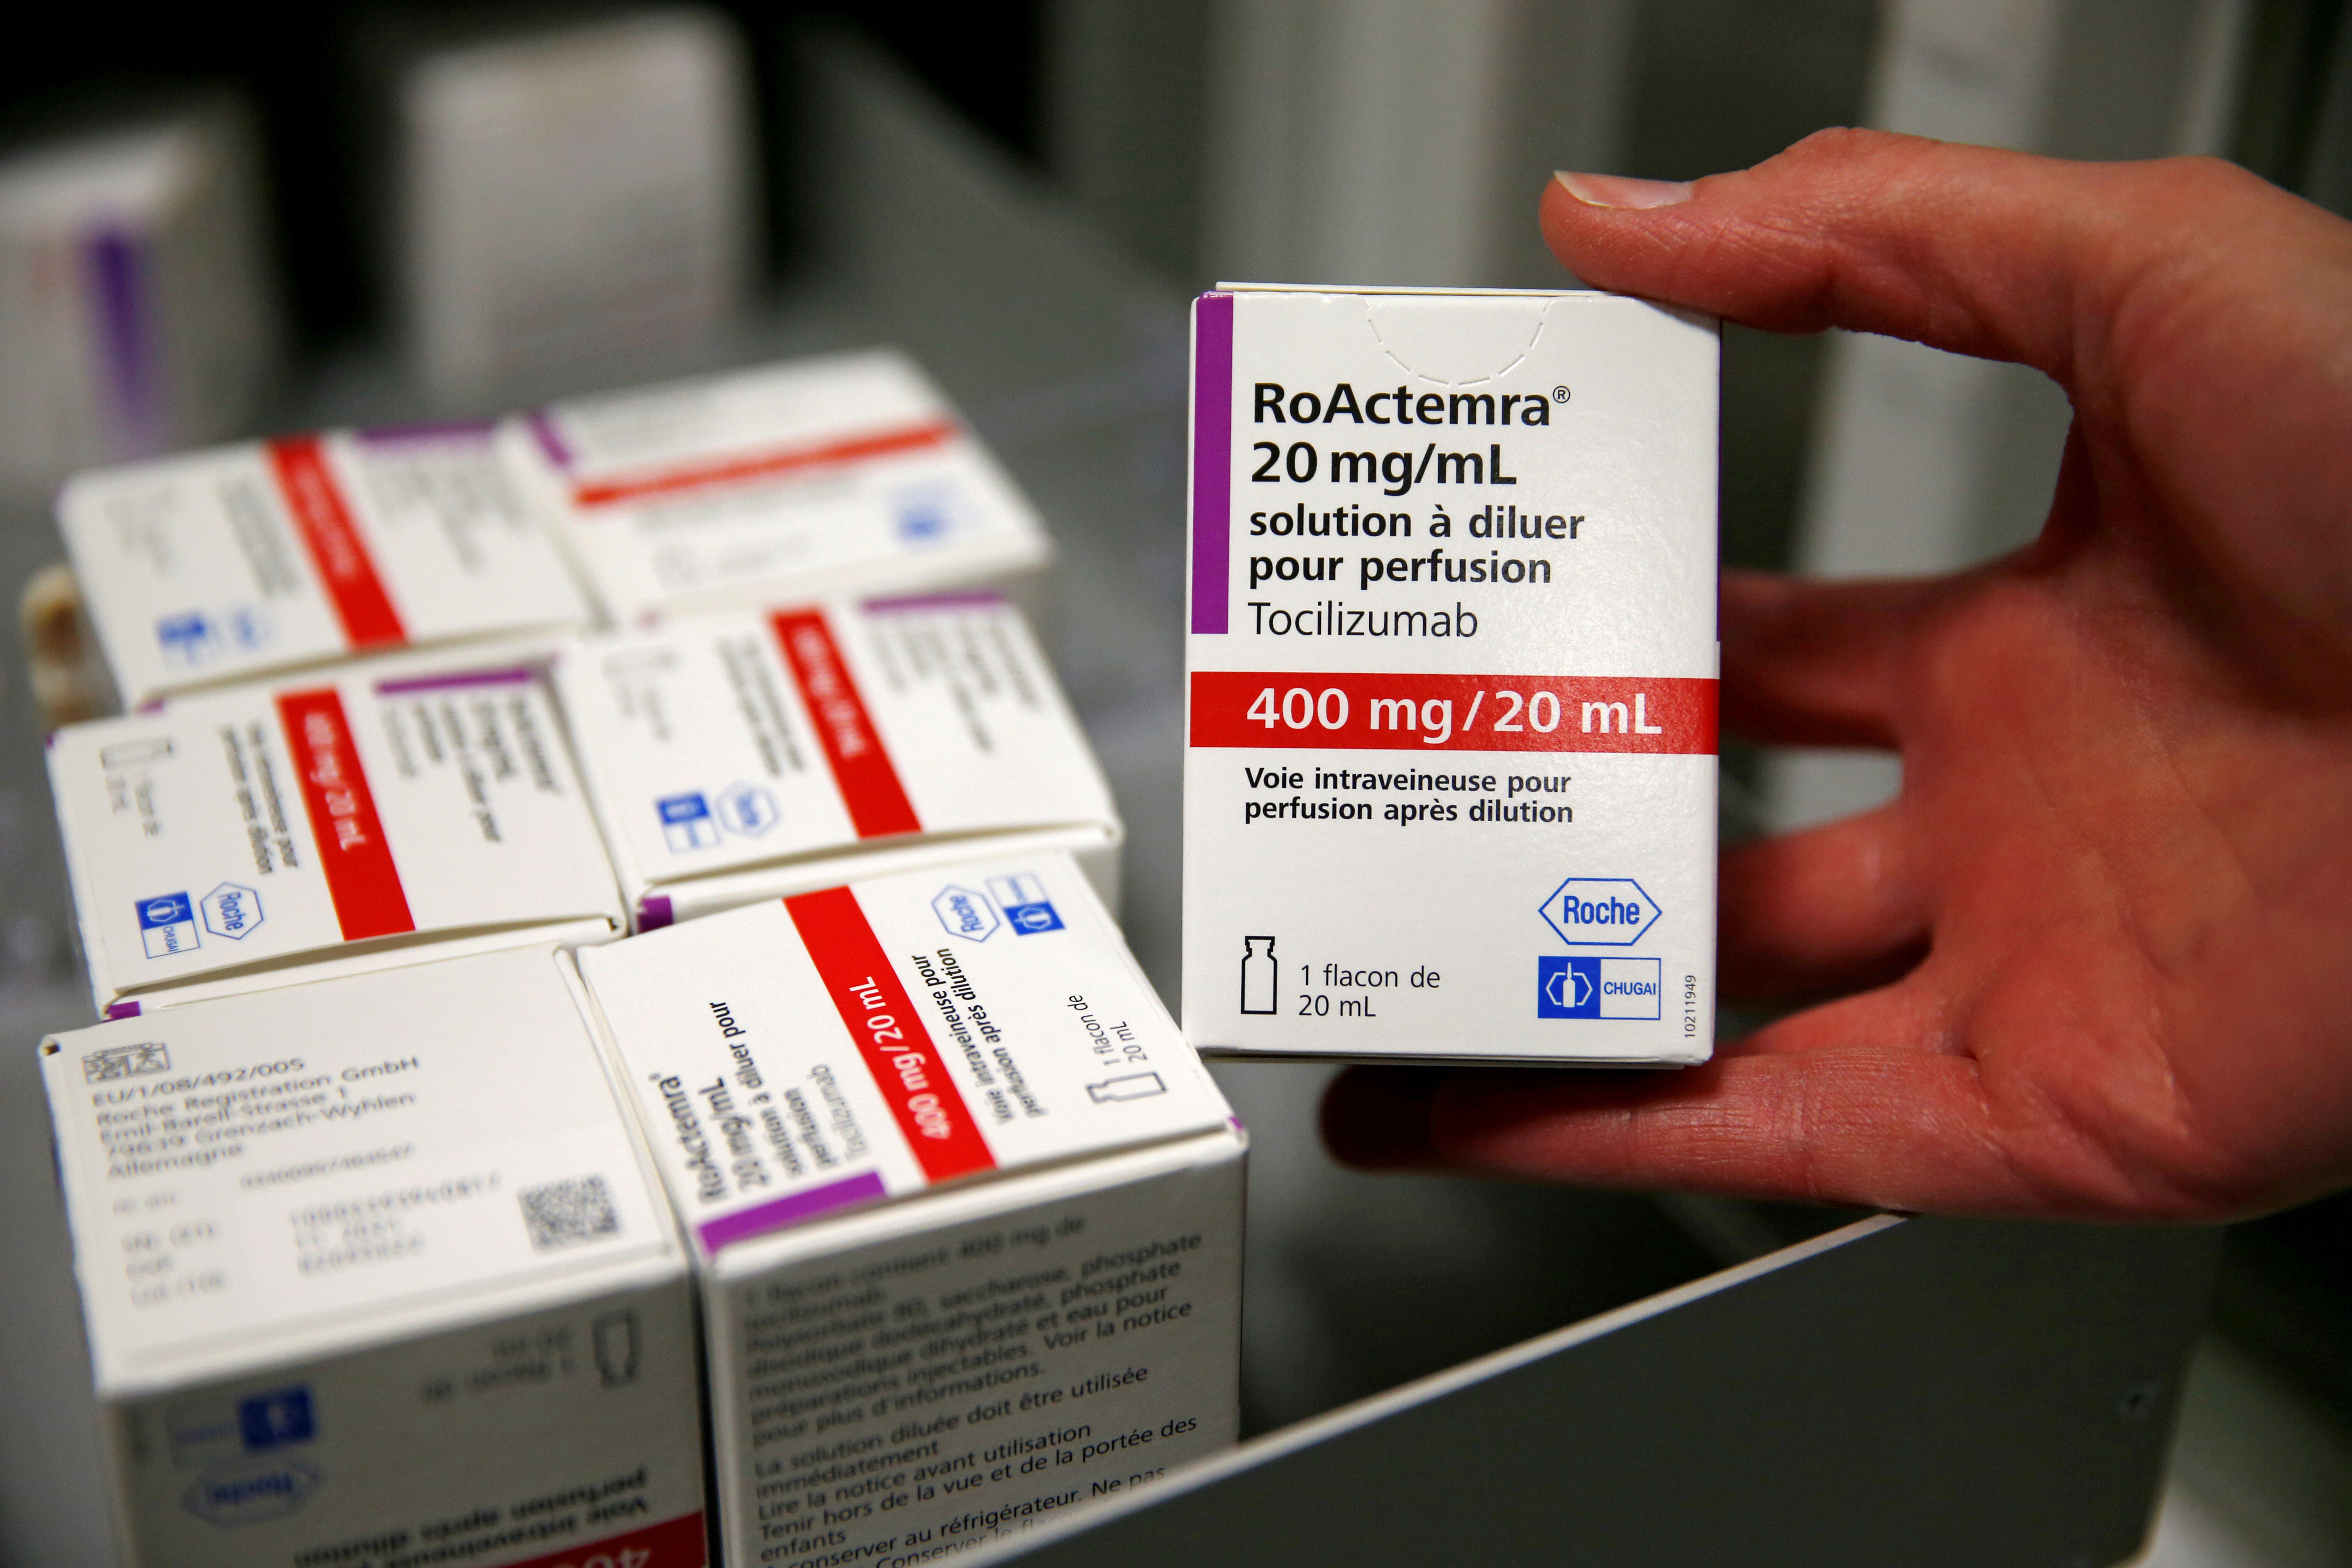 A pharmacist displays a box of tocilizumab, which is used in the treatment of rheumatoid arthritis, at the pharmacy of Cambrai hospital, France, April 28, 2020. REUTERS/Pascal Rossignol